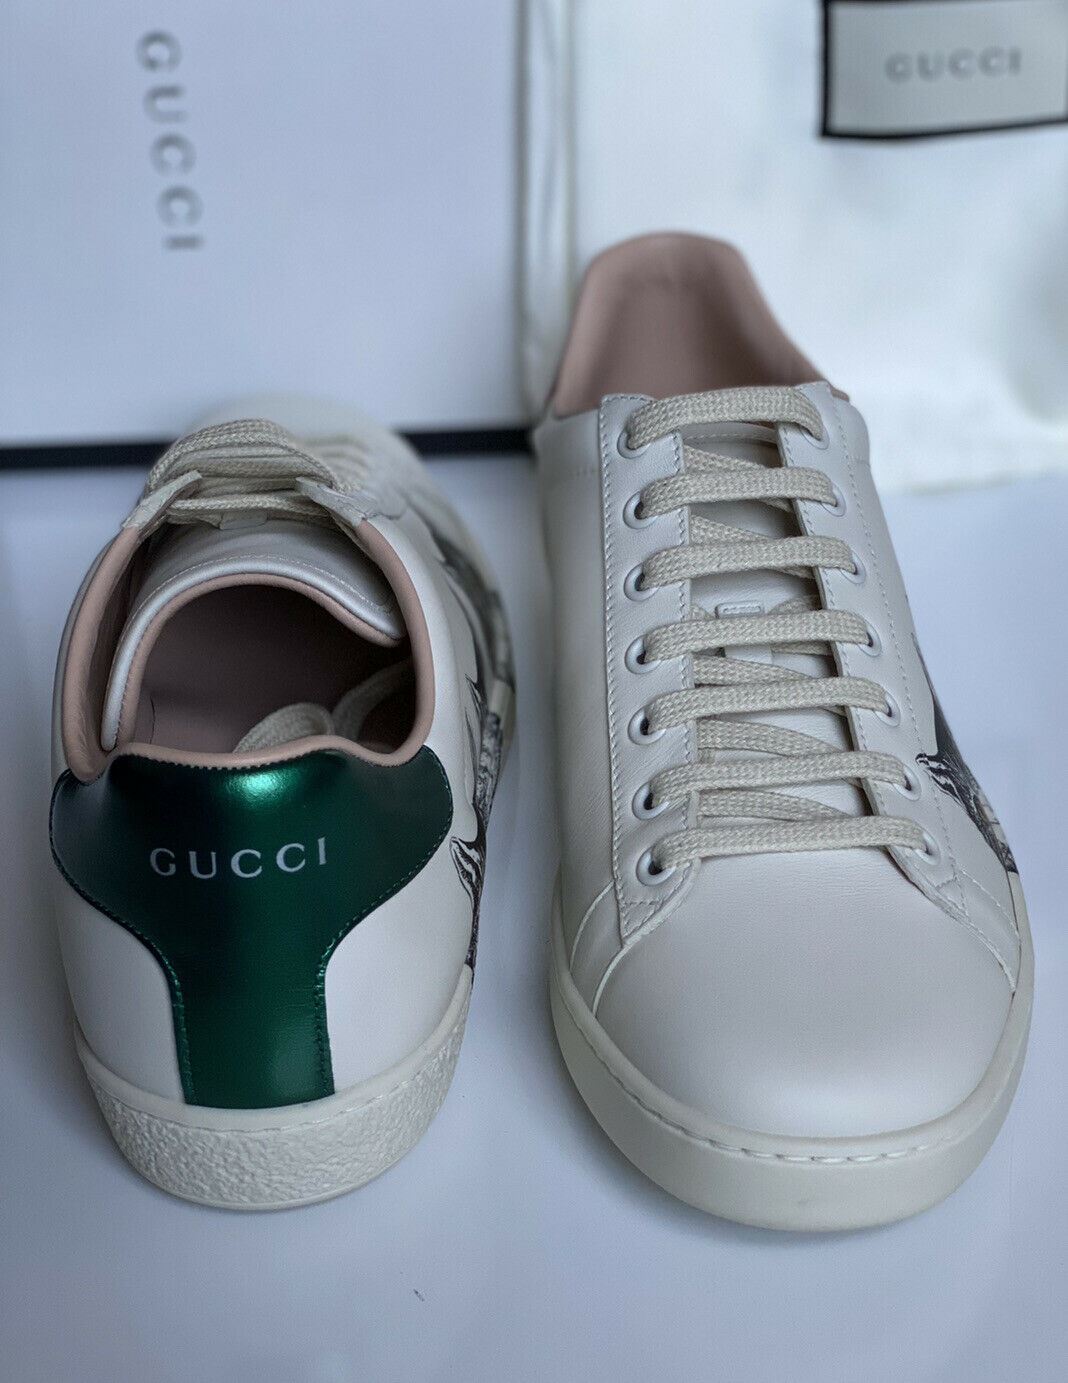 NIB Gucci Ace Mystic Cats Leather Low Top Sneakers 10.5 US (40.5 Euro) 577147